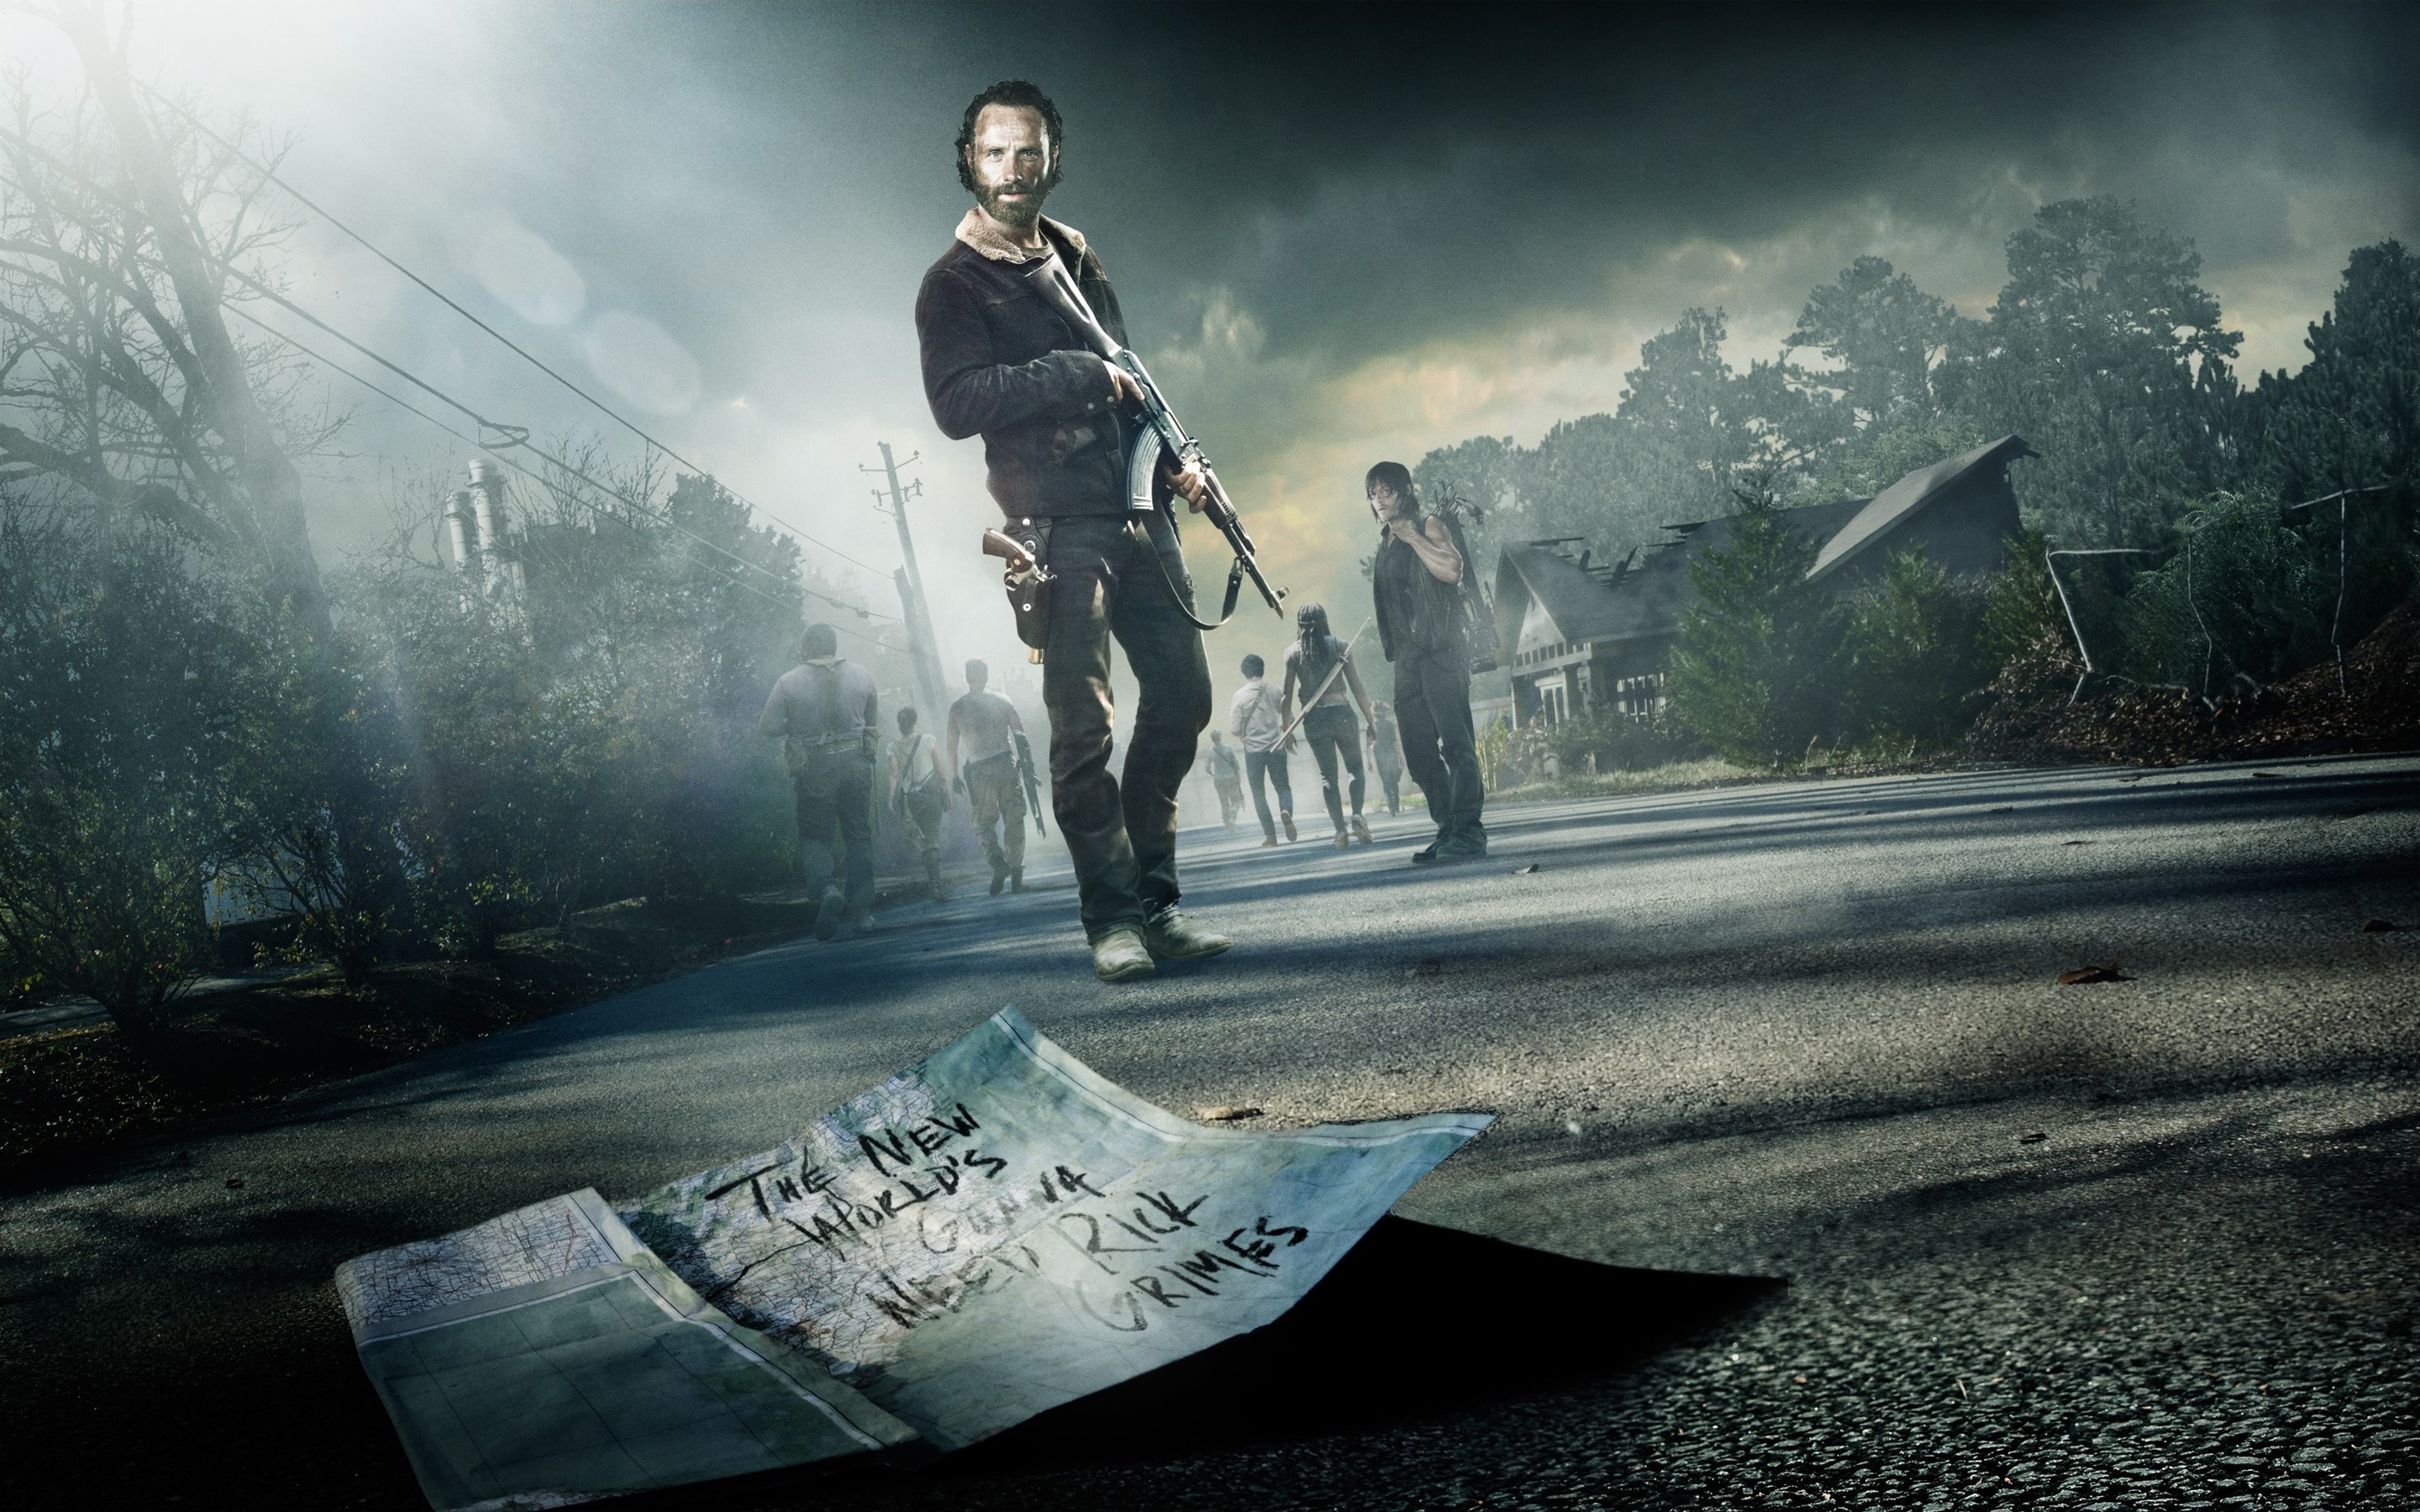 660 The Walking Dead HD Wallpapers | Backgrounds - Wallpaper Abyss